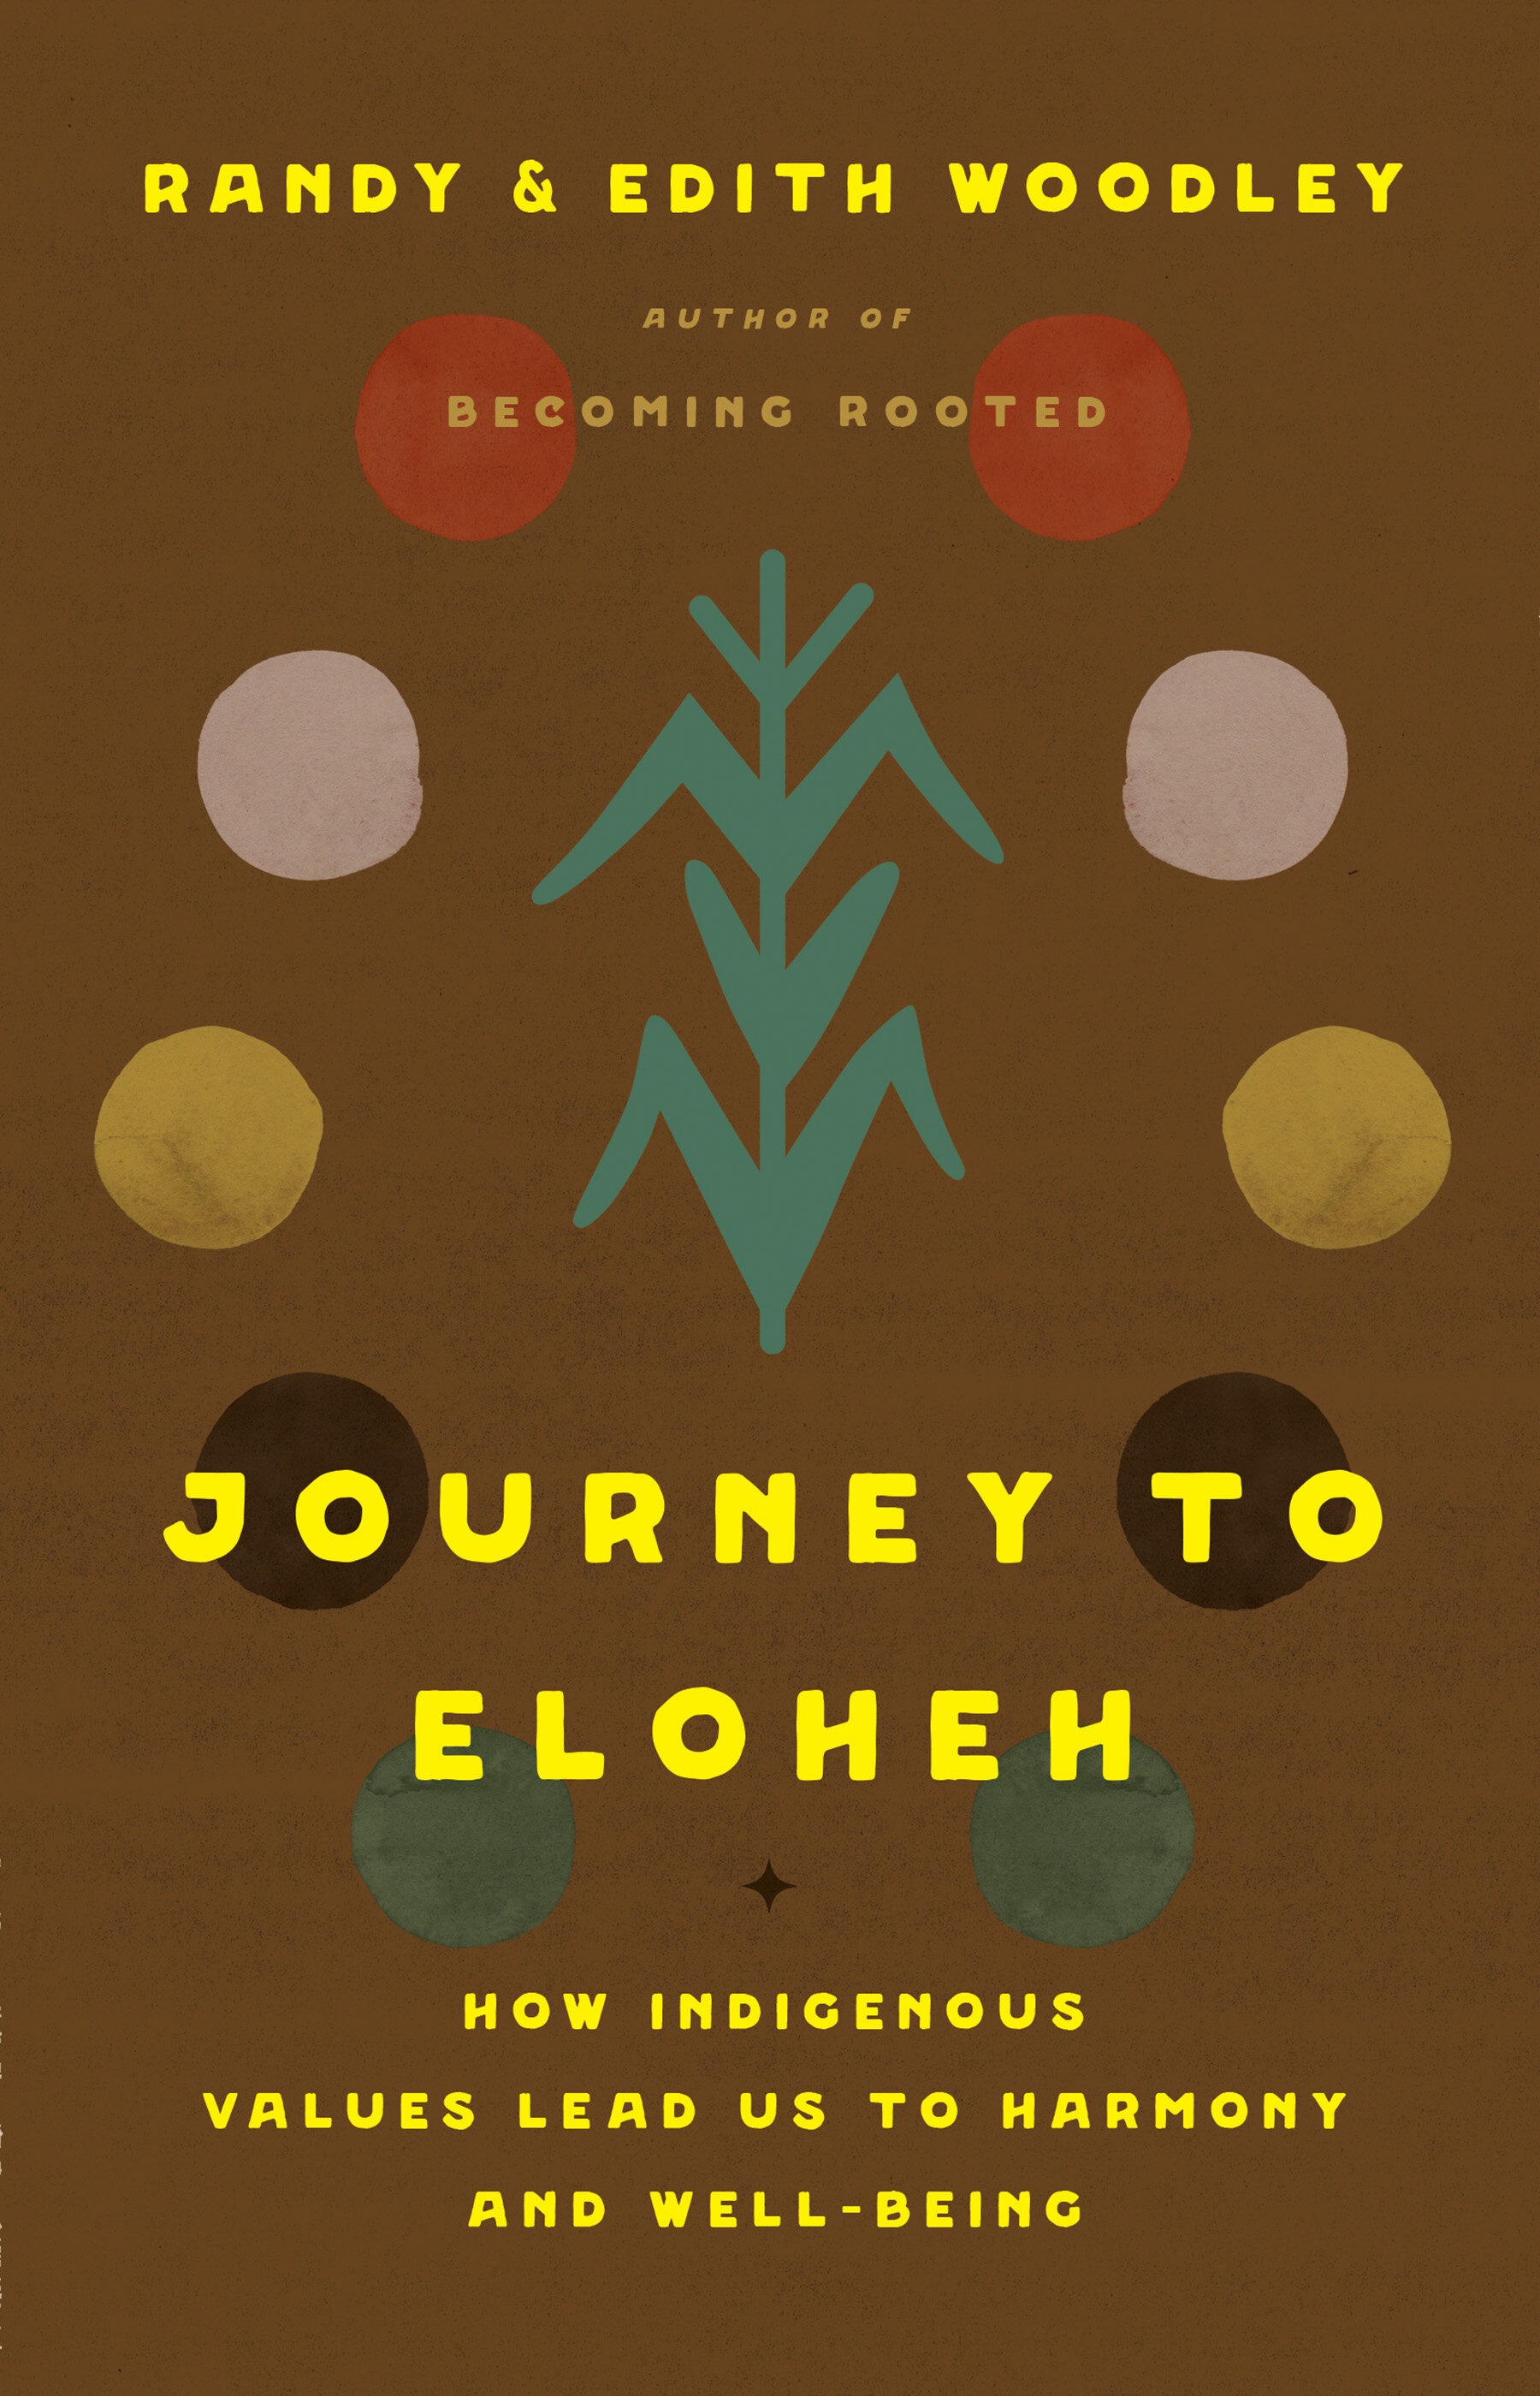 Journey to Eloheh: How Indigenous Values Lead Us to Harmony and Well-Being